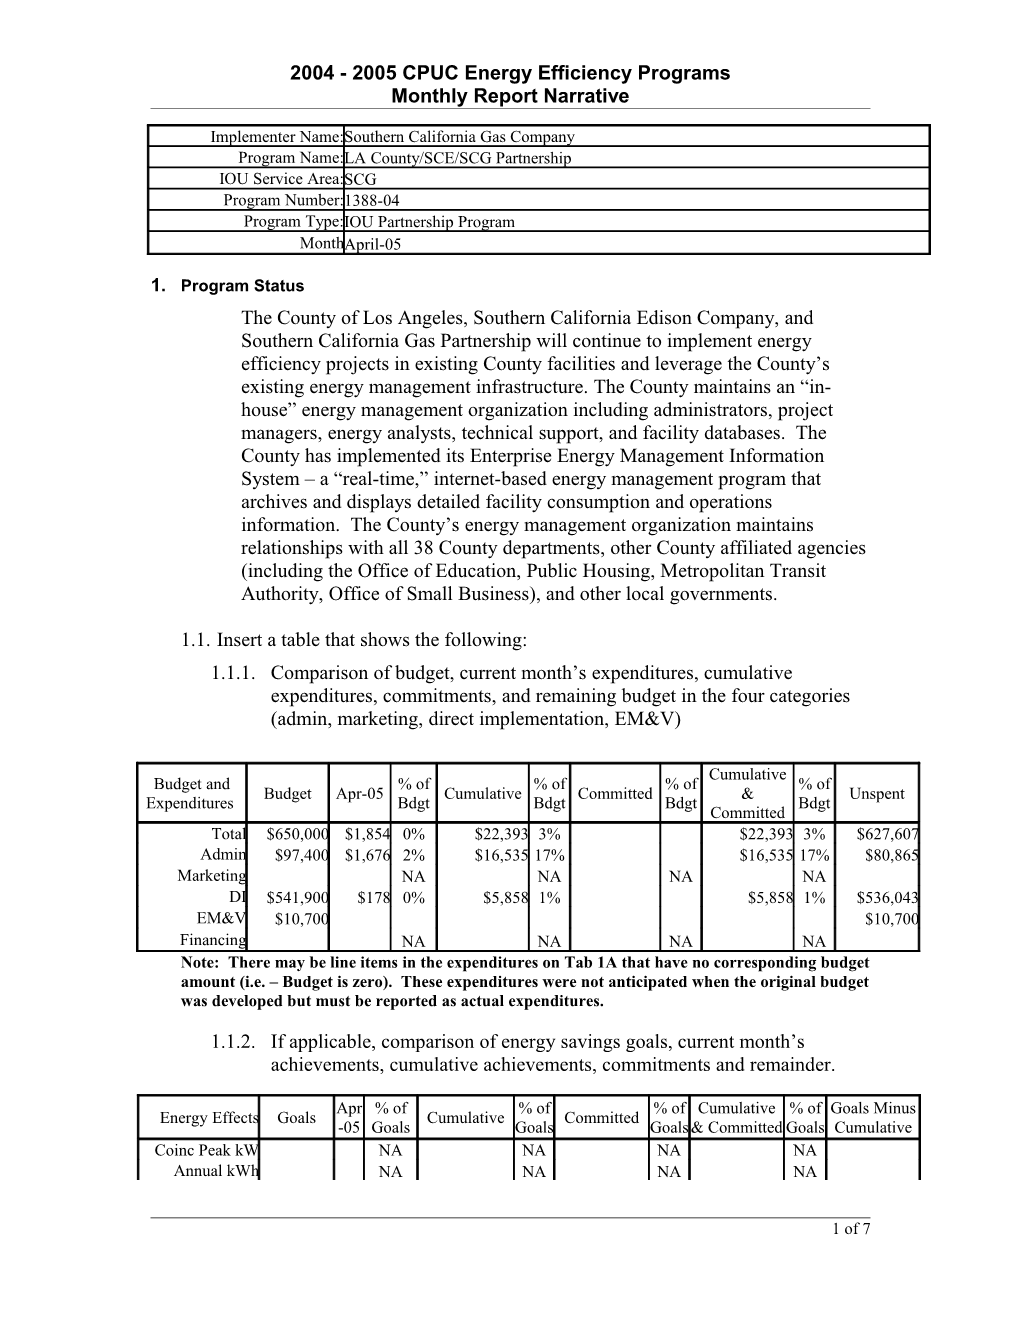 PY 2002 Energy Efficiency Reporting Requirements s4